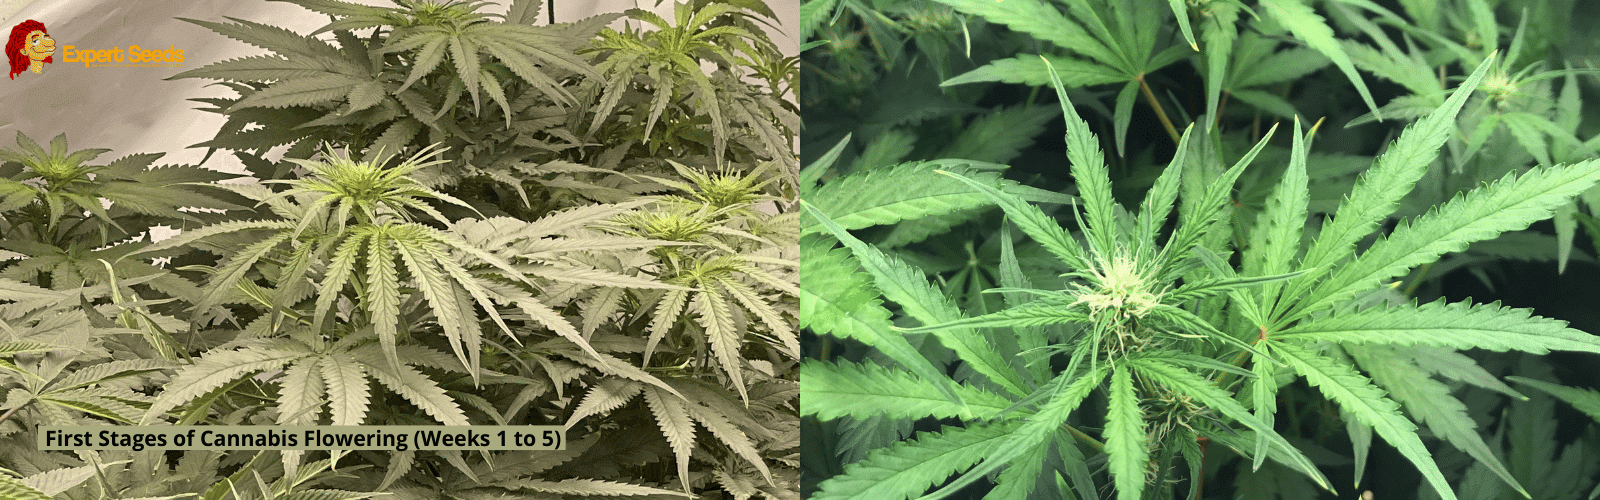 First Stages of Cannabis Flowering Weeks 1 to 5 1